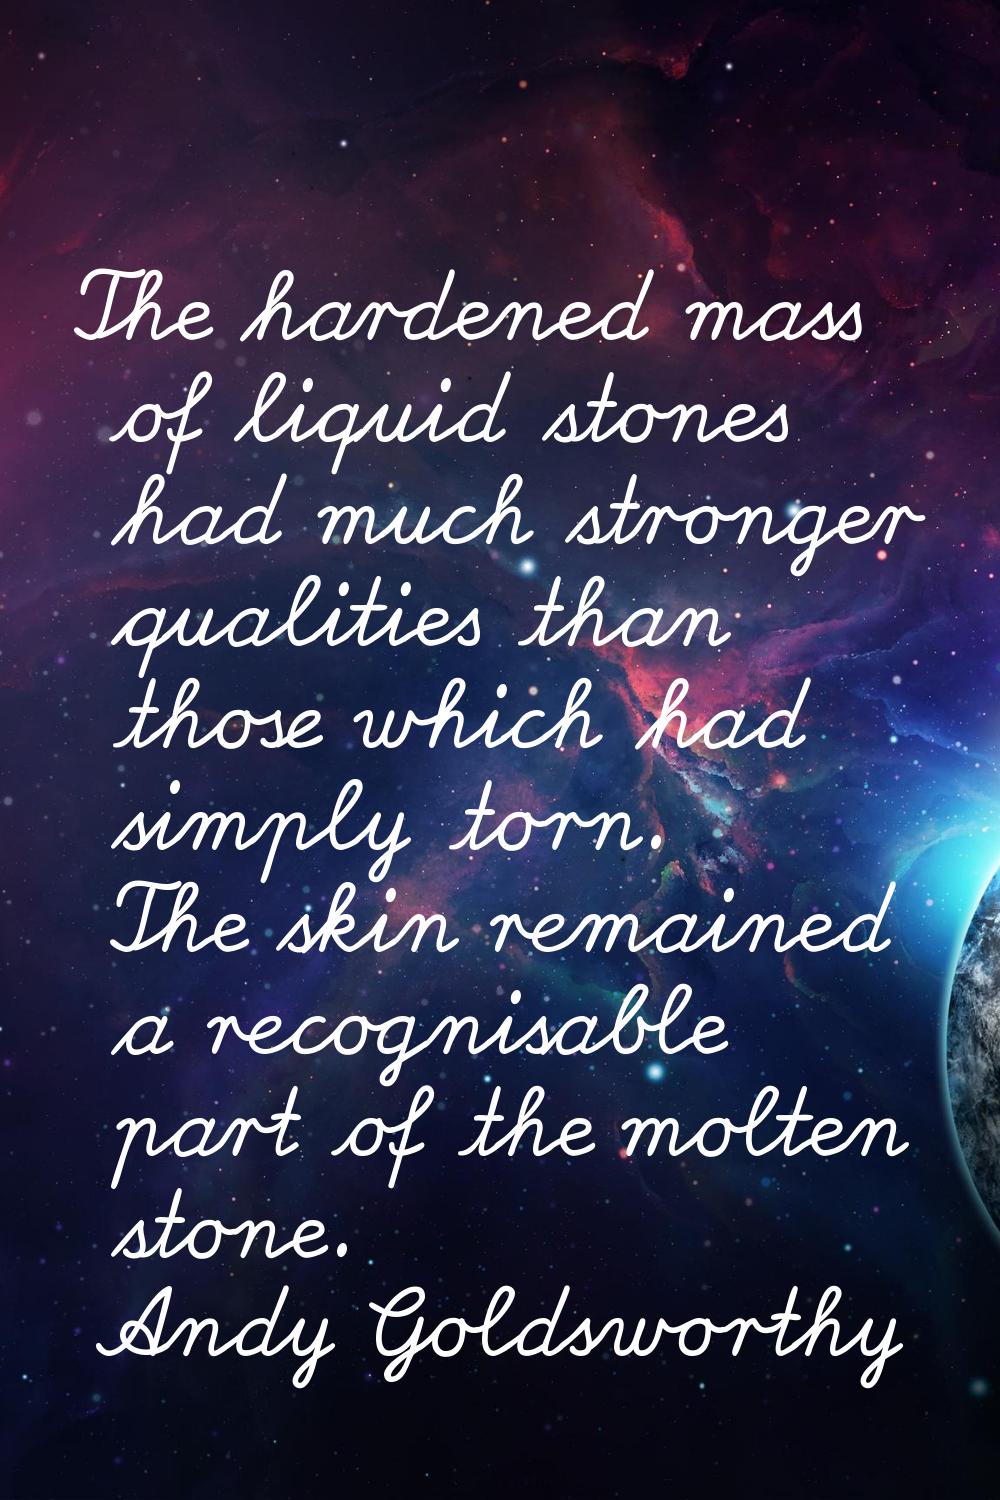 The hardened mass of liquid stones had much stronger qualities than those which had simply torn. Th